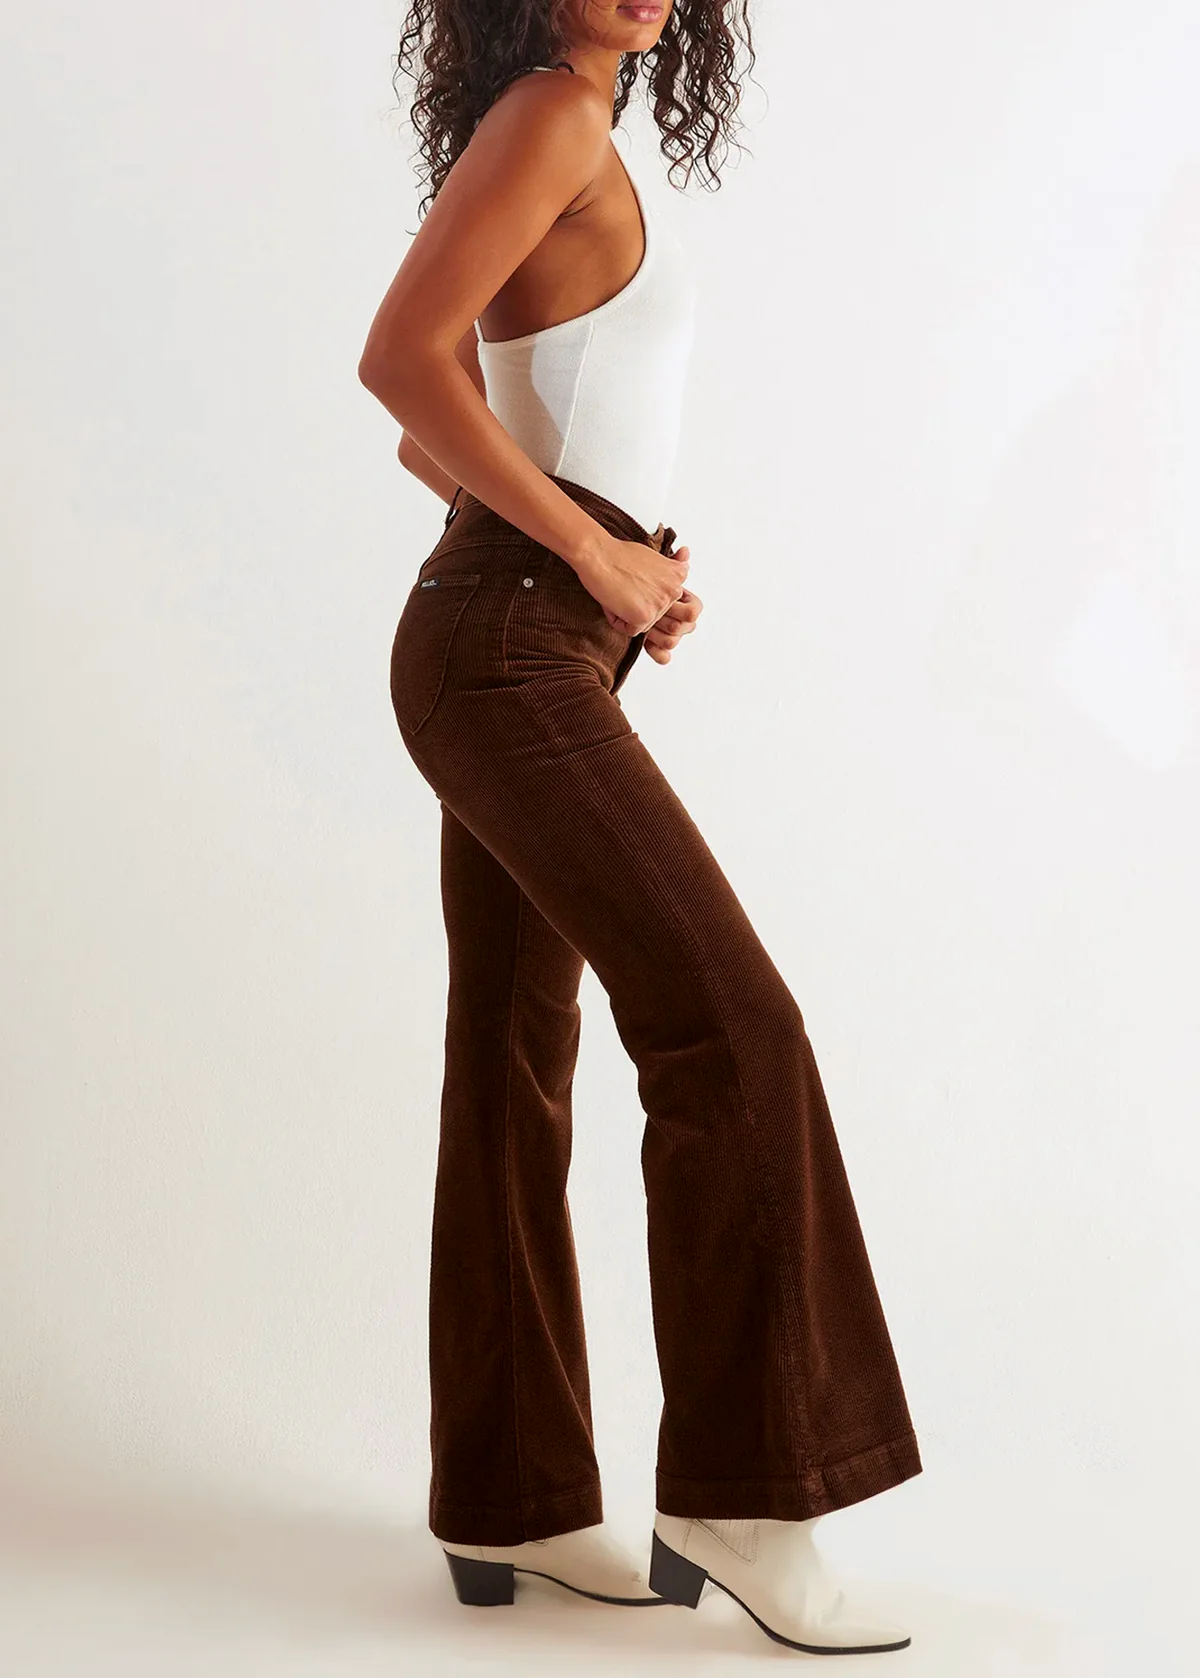 70s inspired brown stretch corduroy Eastcoast Flares with high rise waist by Rolla's Jeans